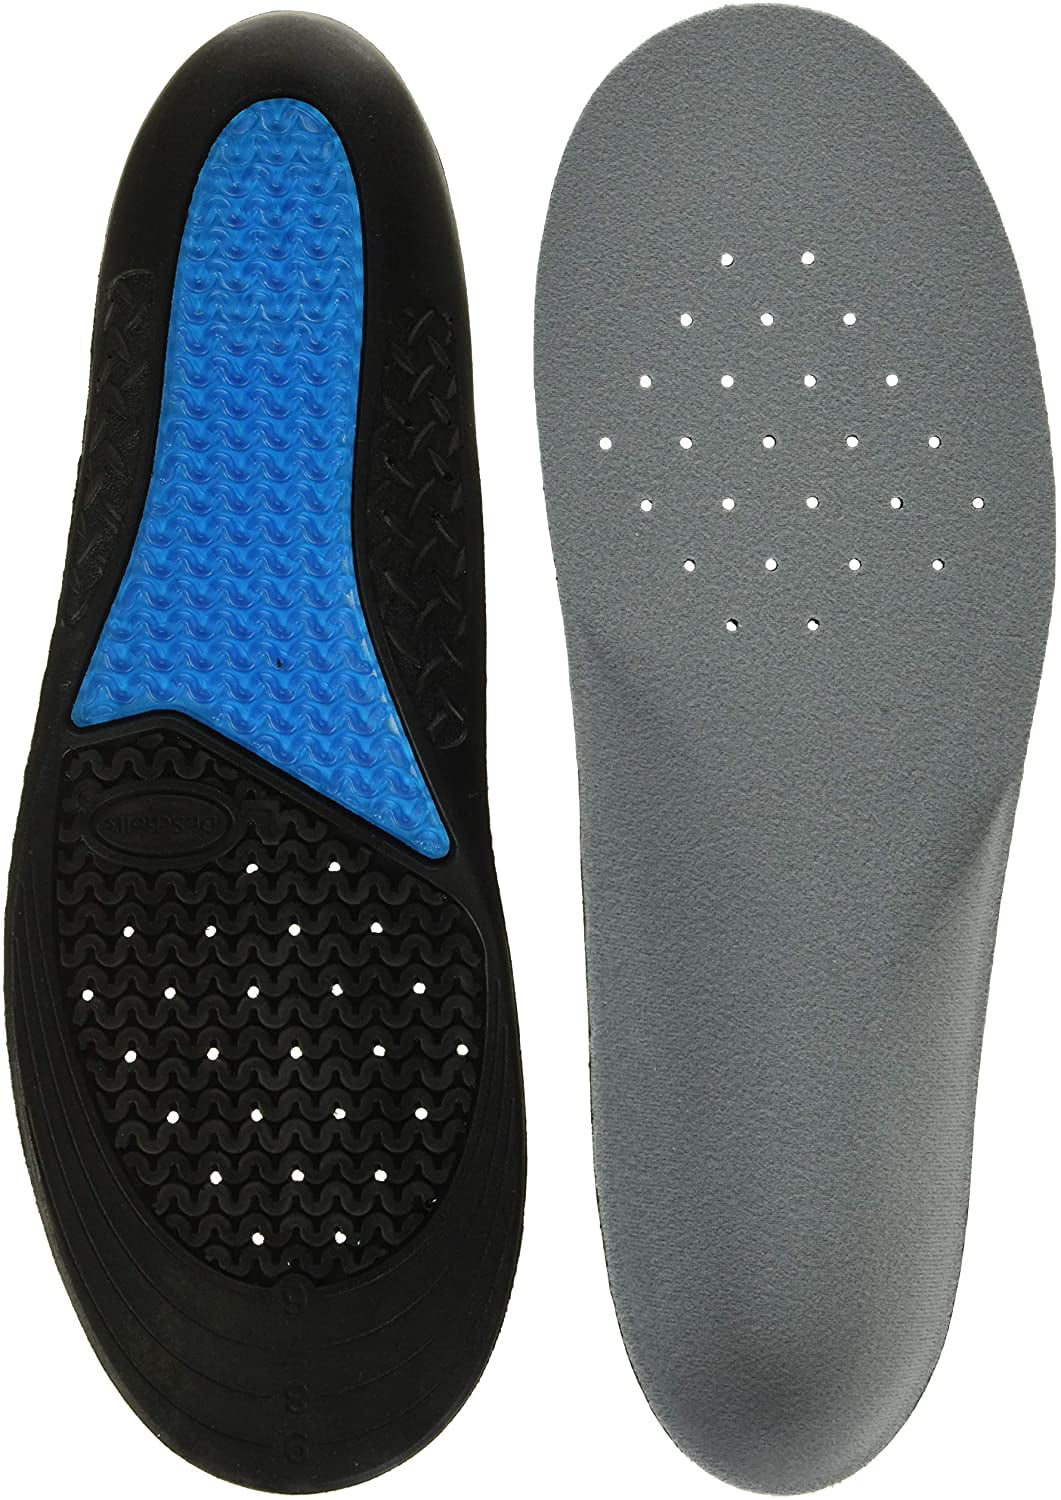 Dr. Scholl's Massaging Gel Advanced Work Insoles, All-day Comfort for ...